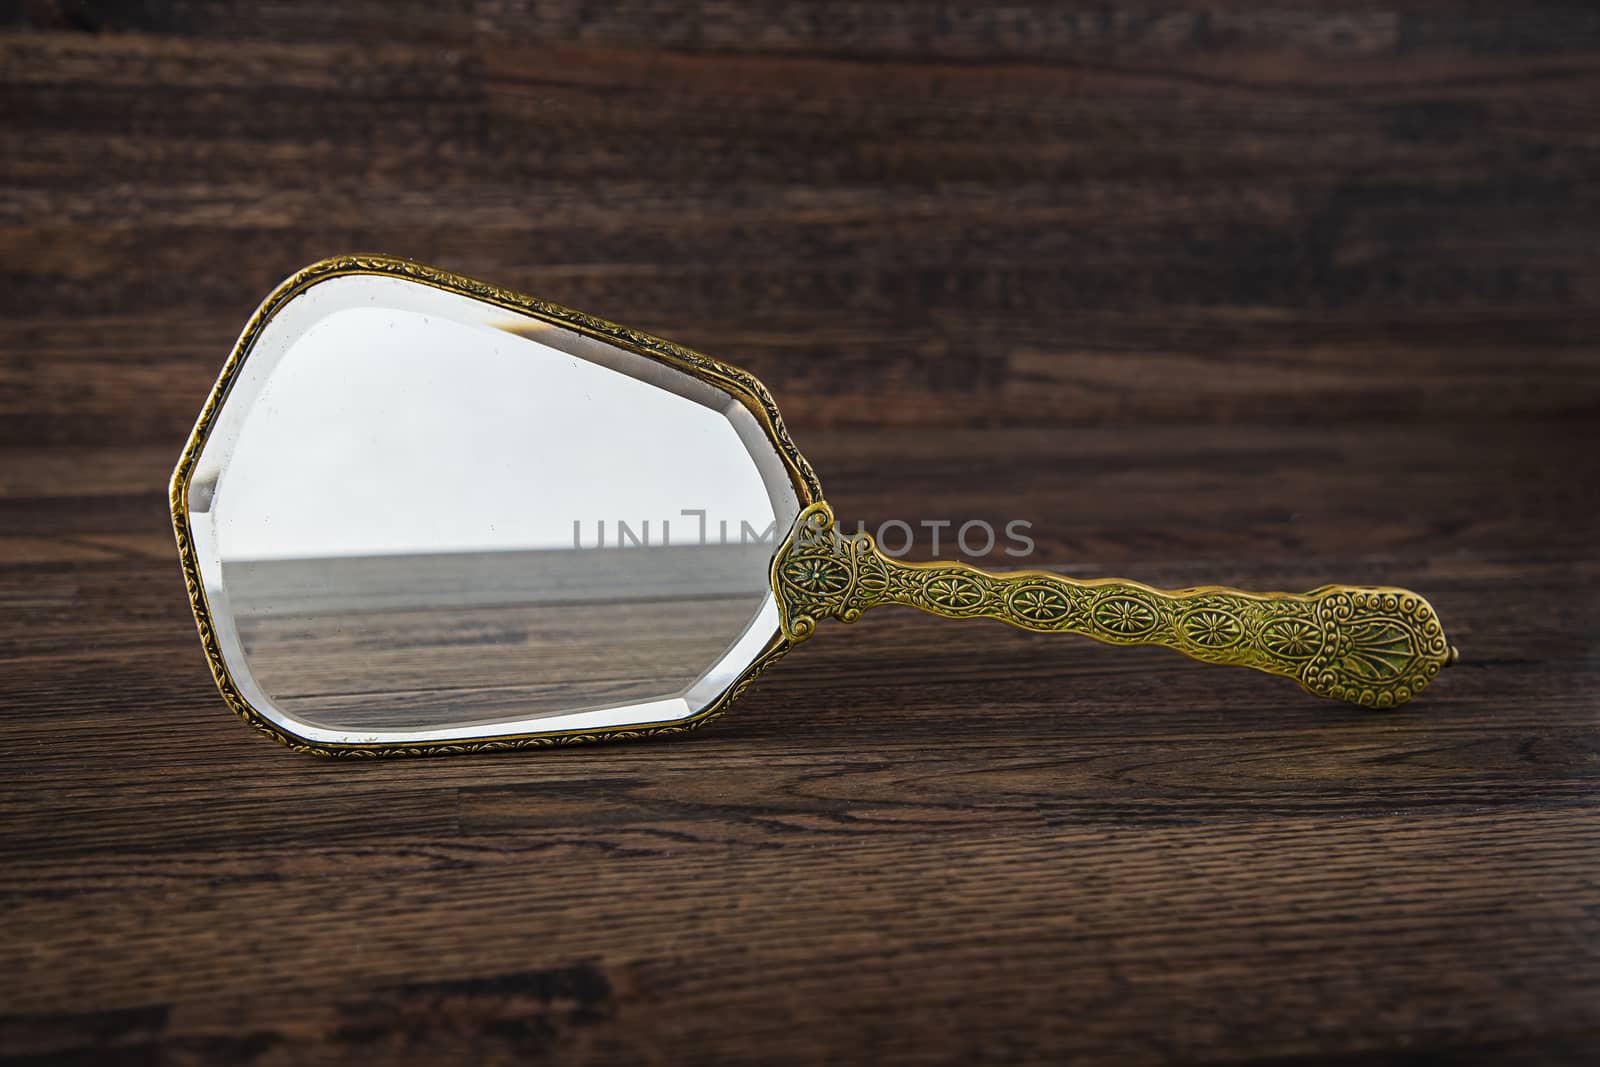 old vintage mirror standing on it’s side against a dark wood background